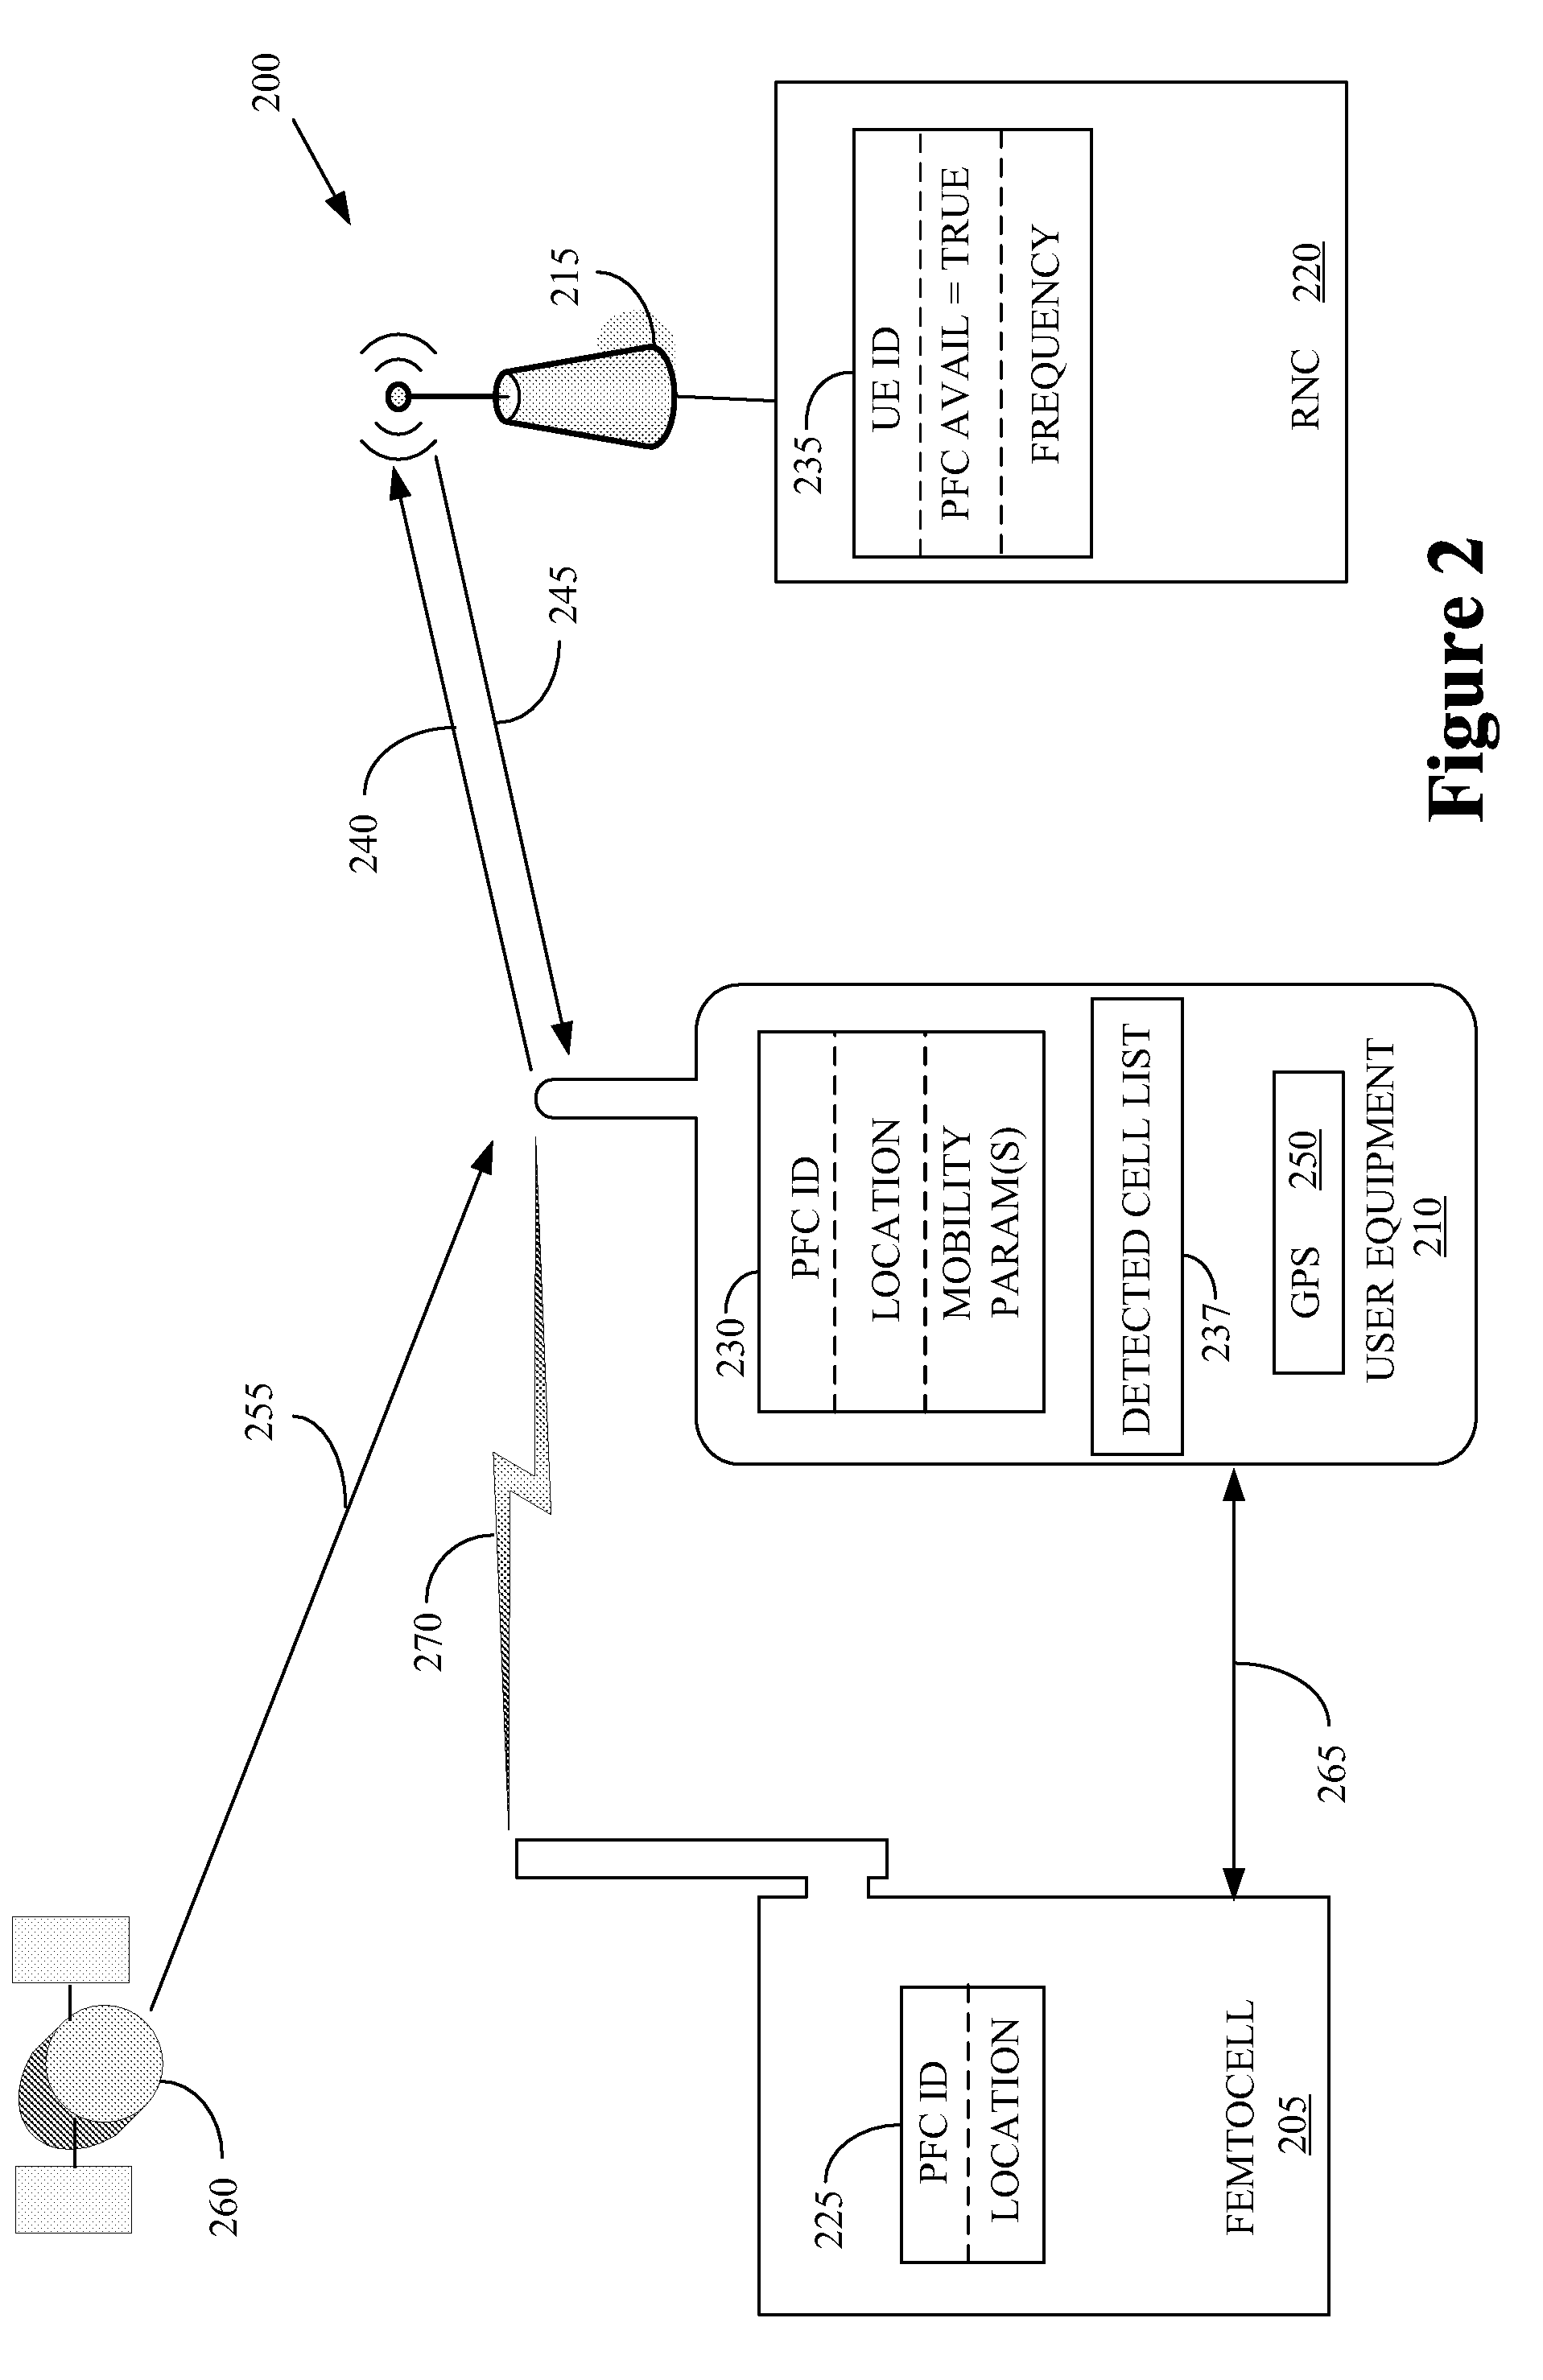 Location-based handovers from a macrocell to a femtocell using event-triggered measurement reporting